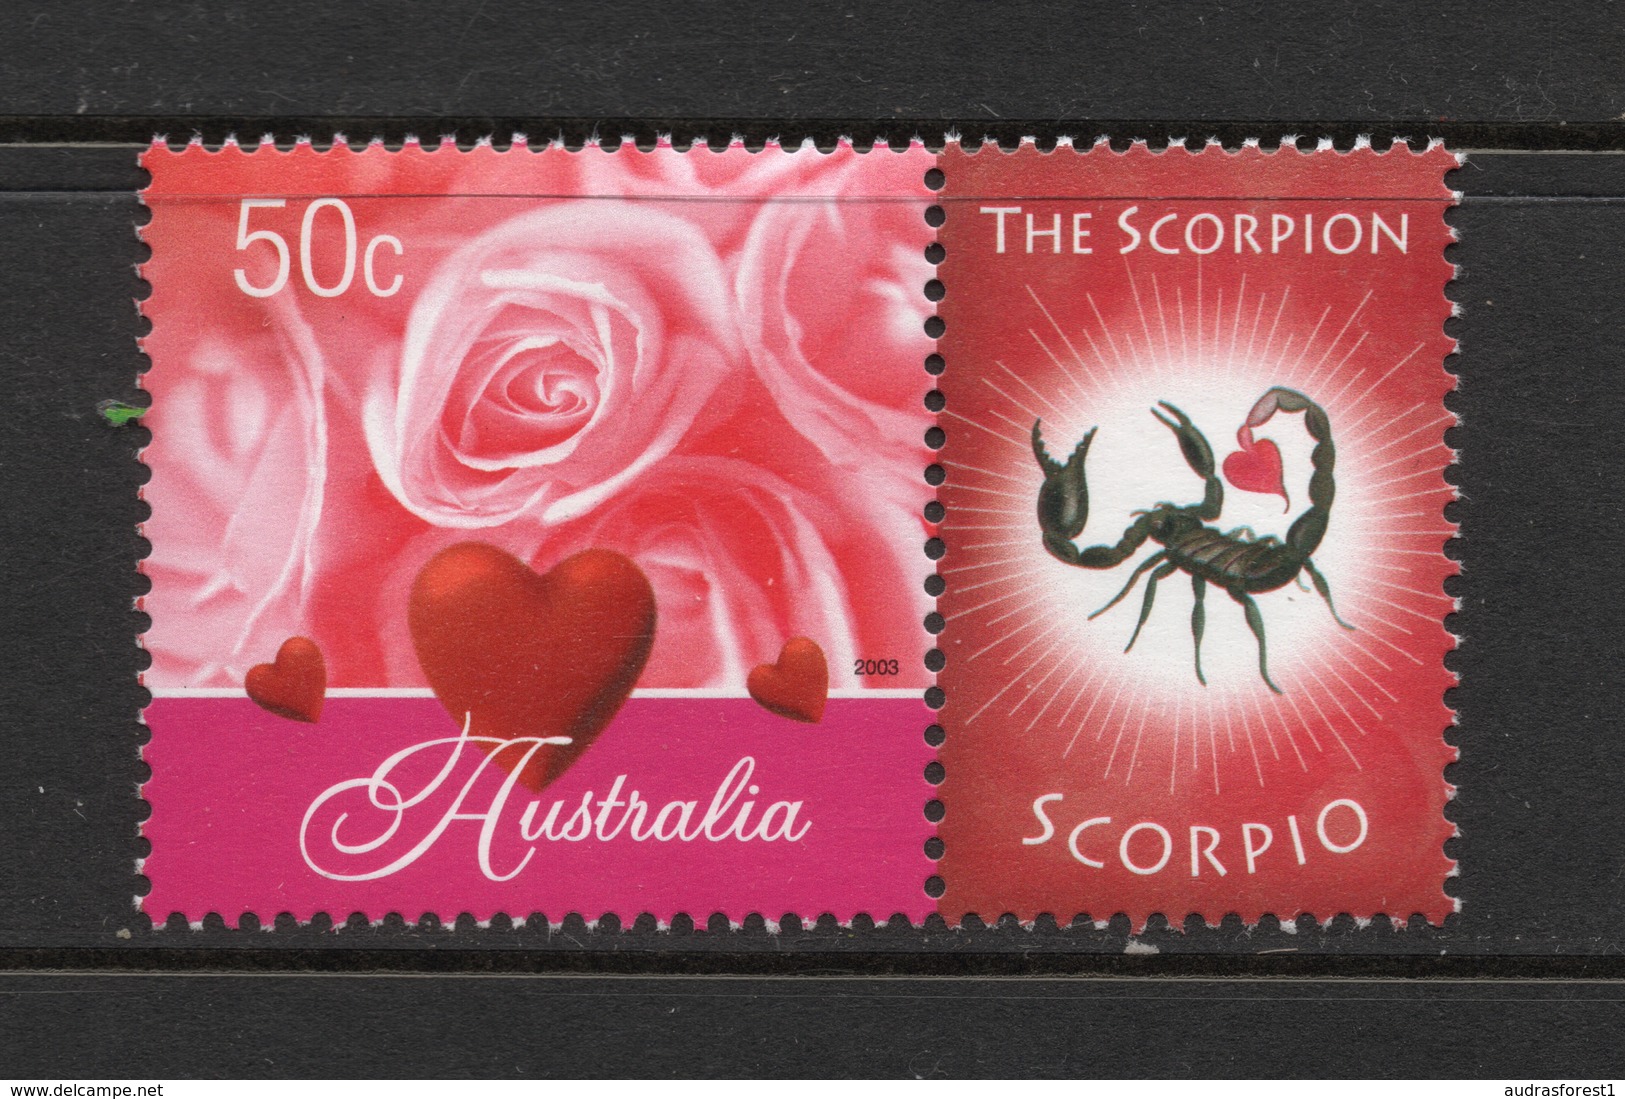 2003 ZODIAC - SCORPIO THE SCORPION 50c MNH RED ROSES Stamp With RIGHT MARGIN TAB - Issued In AUSTRALIA - Neufs